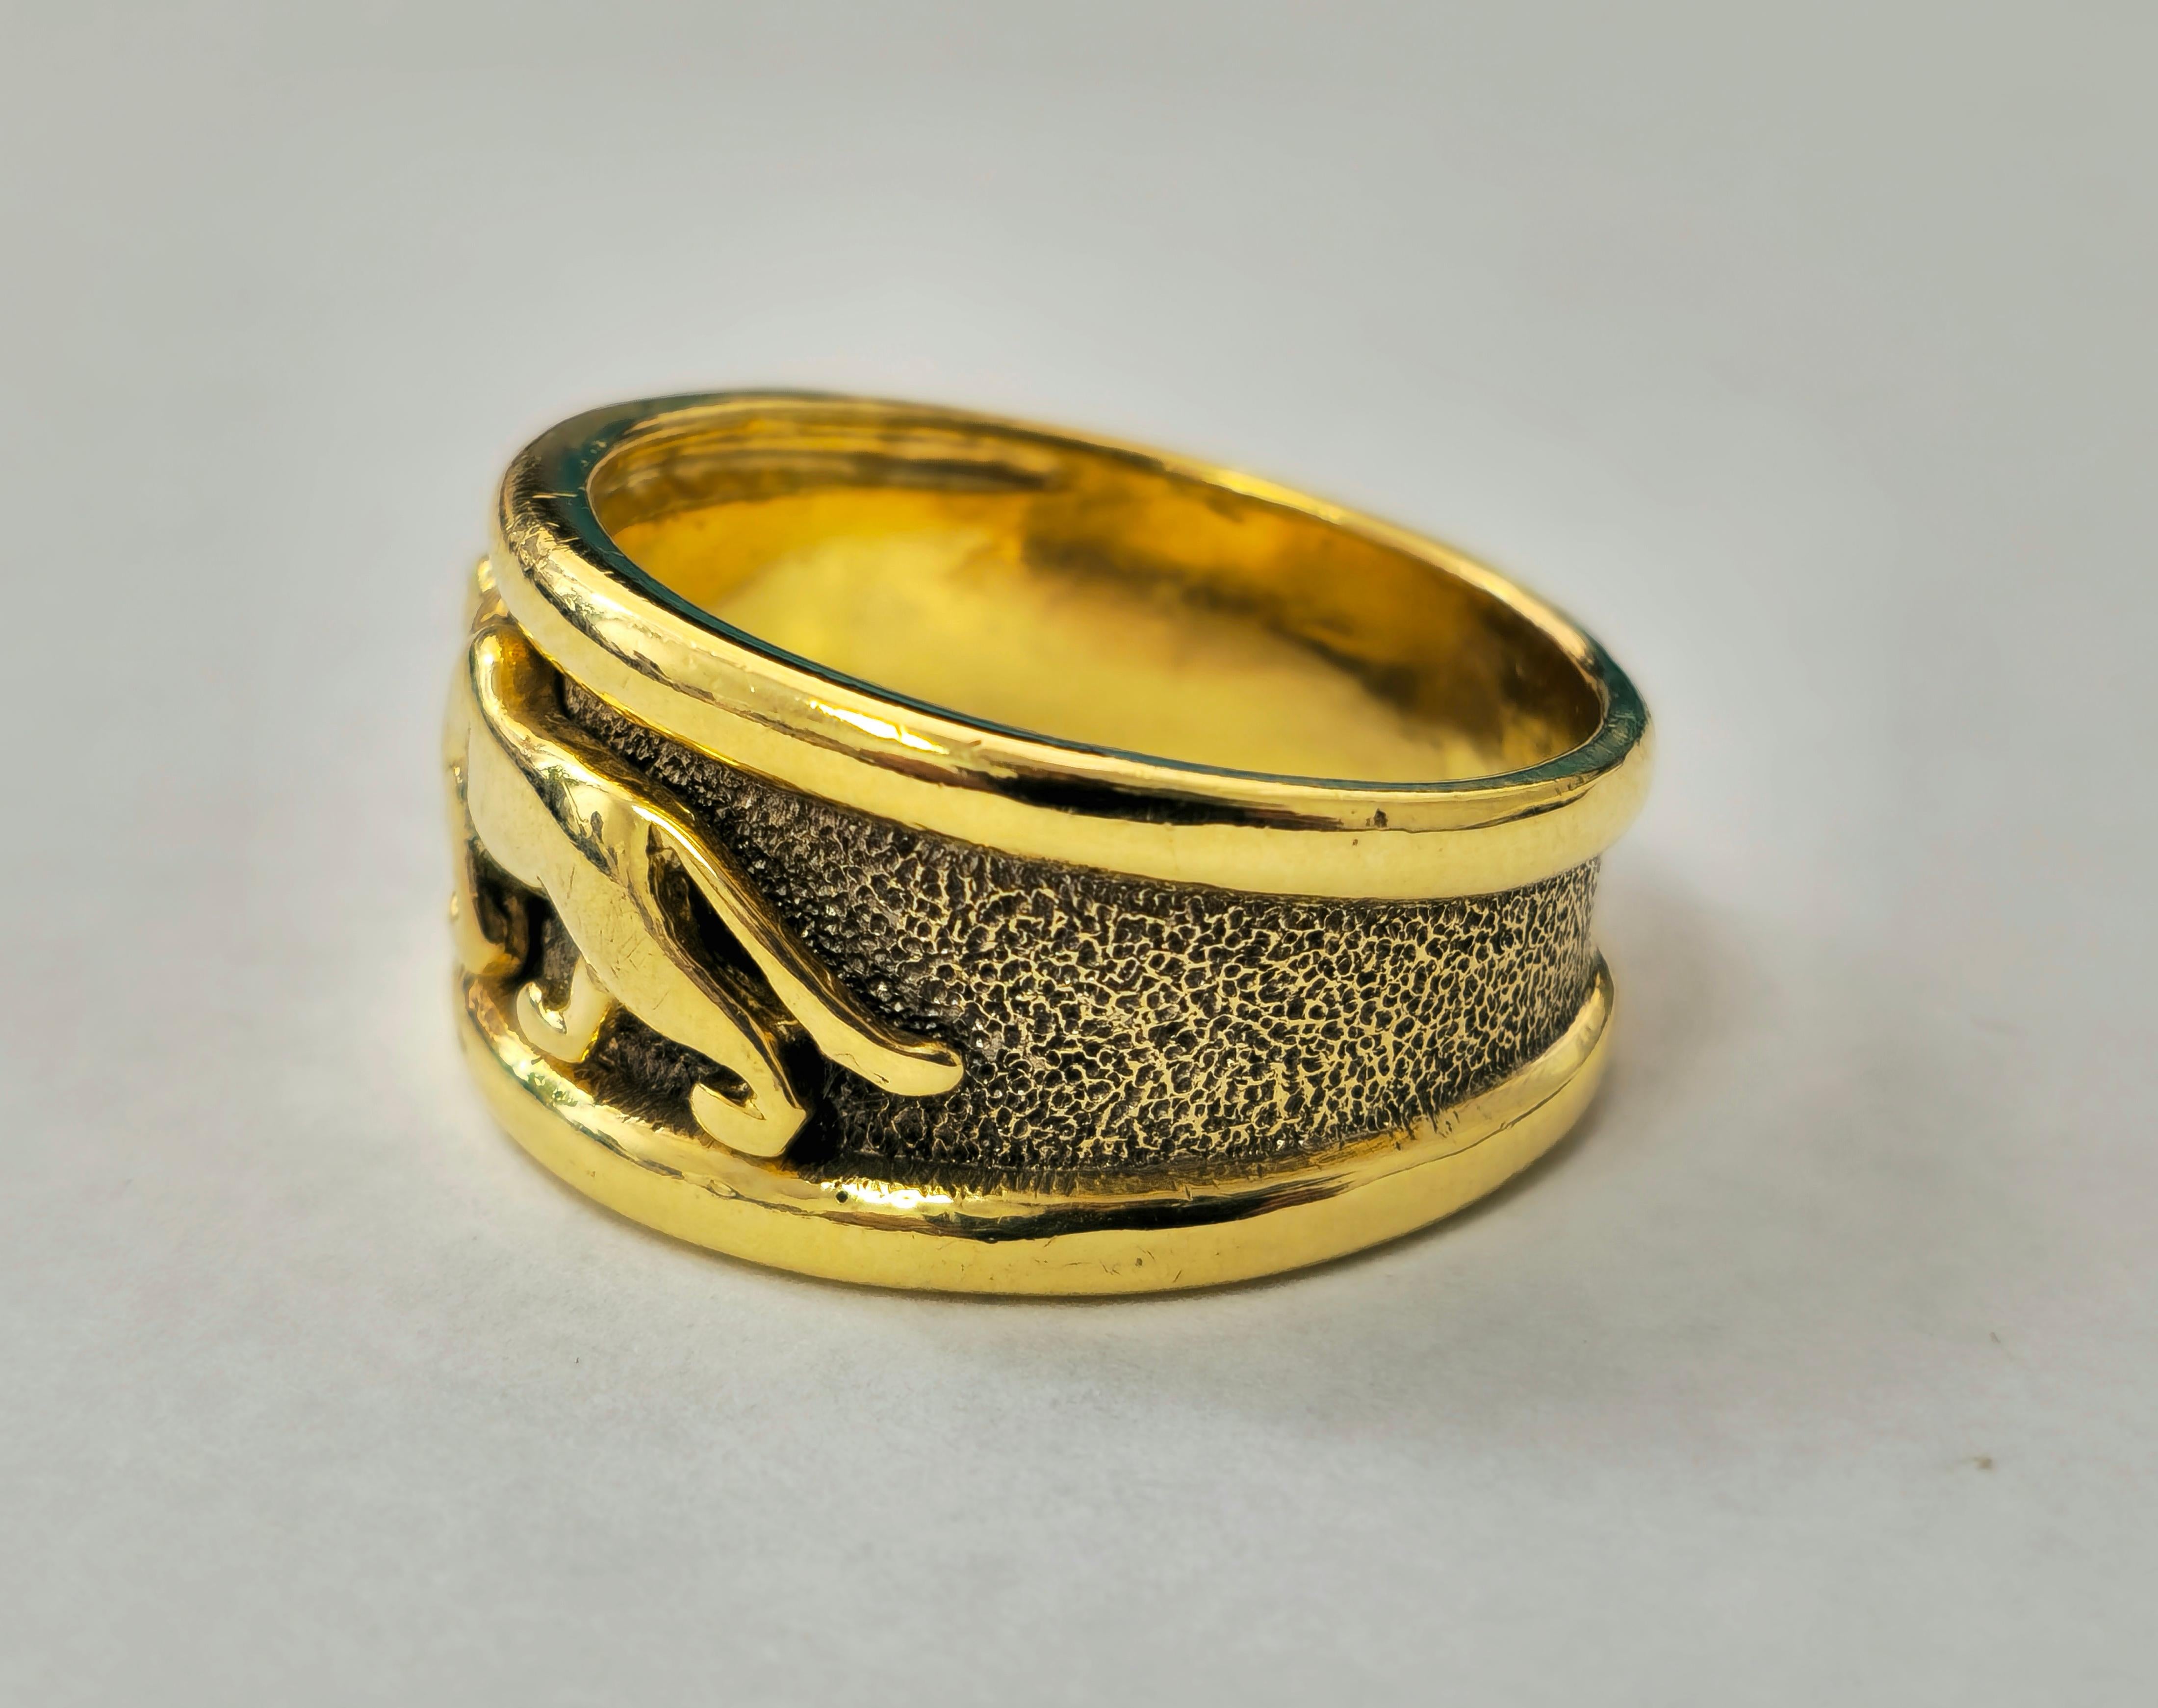 Metal: 14k yellow gold. 
Total weight: 9.50 grams. 
Ring size: US 10 (free ring resizing available). 
Unisex vintage gold ring. 
Panther motif ring. 

Crafted from 14k yellow gold and weighing 9.50 grams, this vintage ring boasts a distinctive